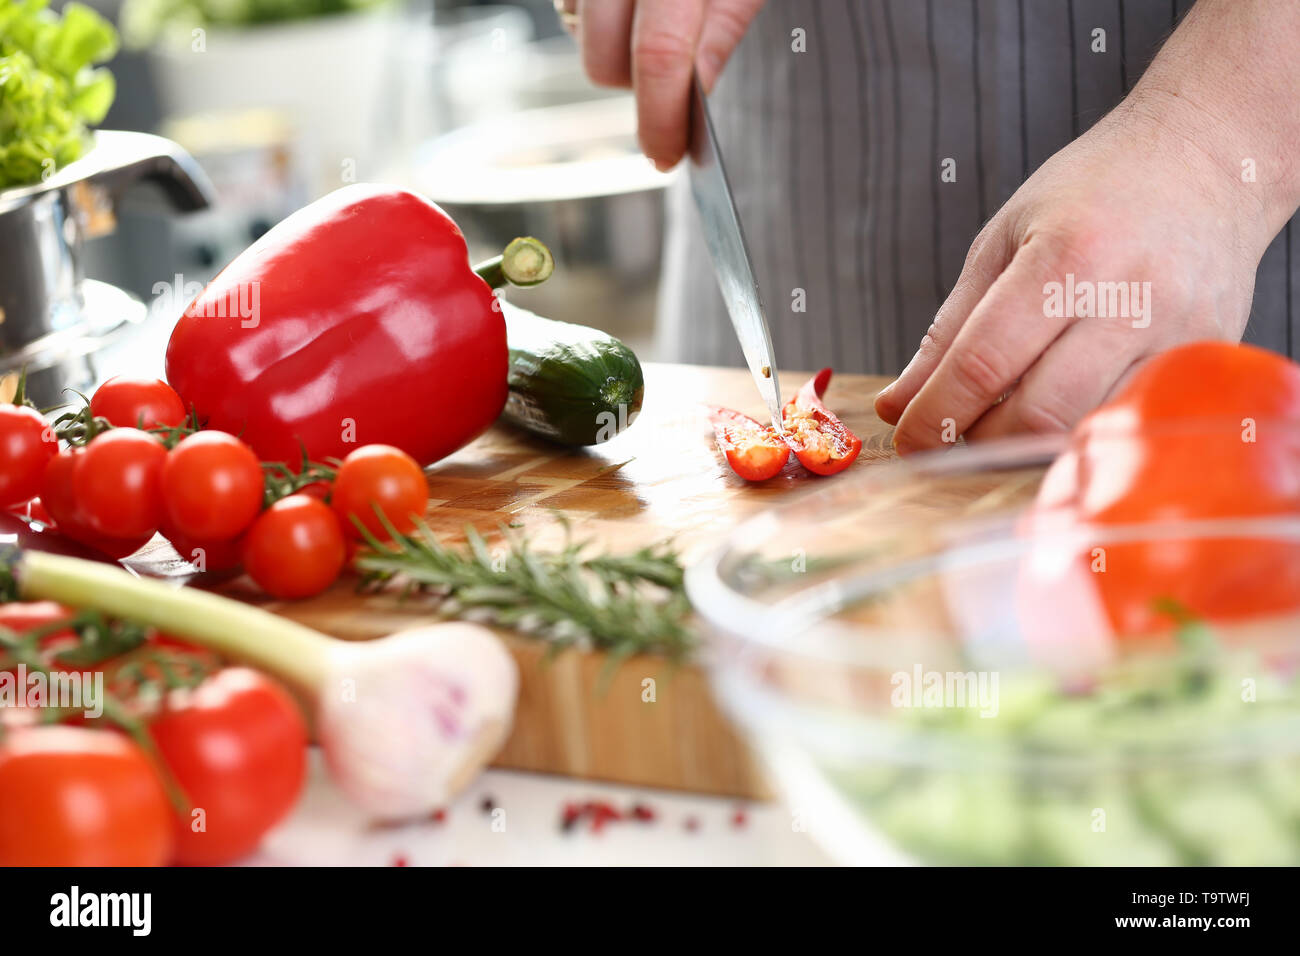 Chef Hands Cutting Red Hot Chili Pepper Halves Stock Photo